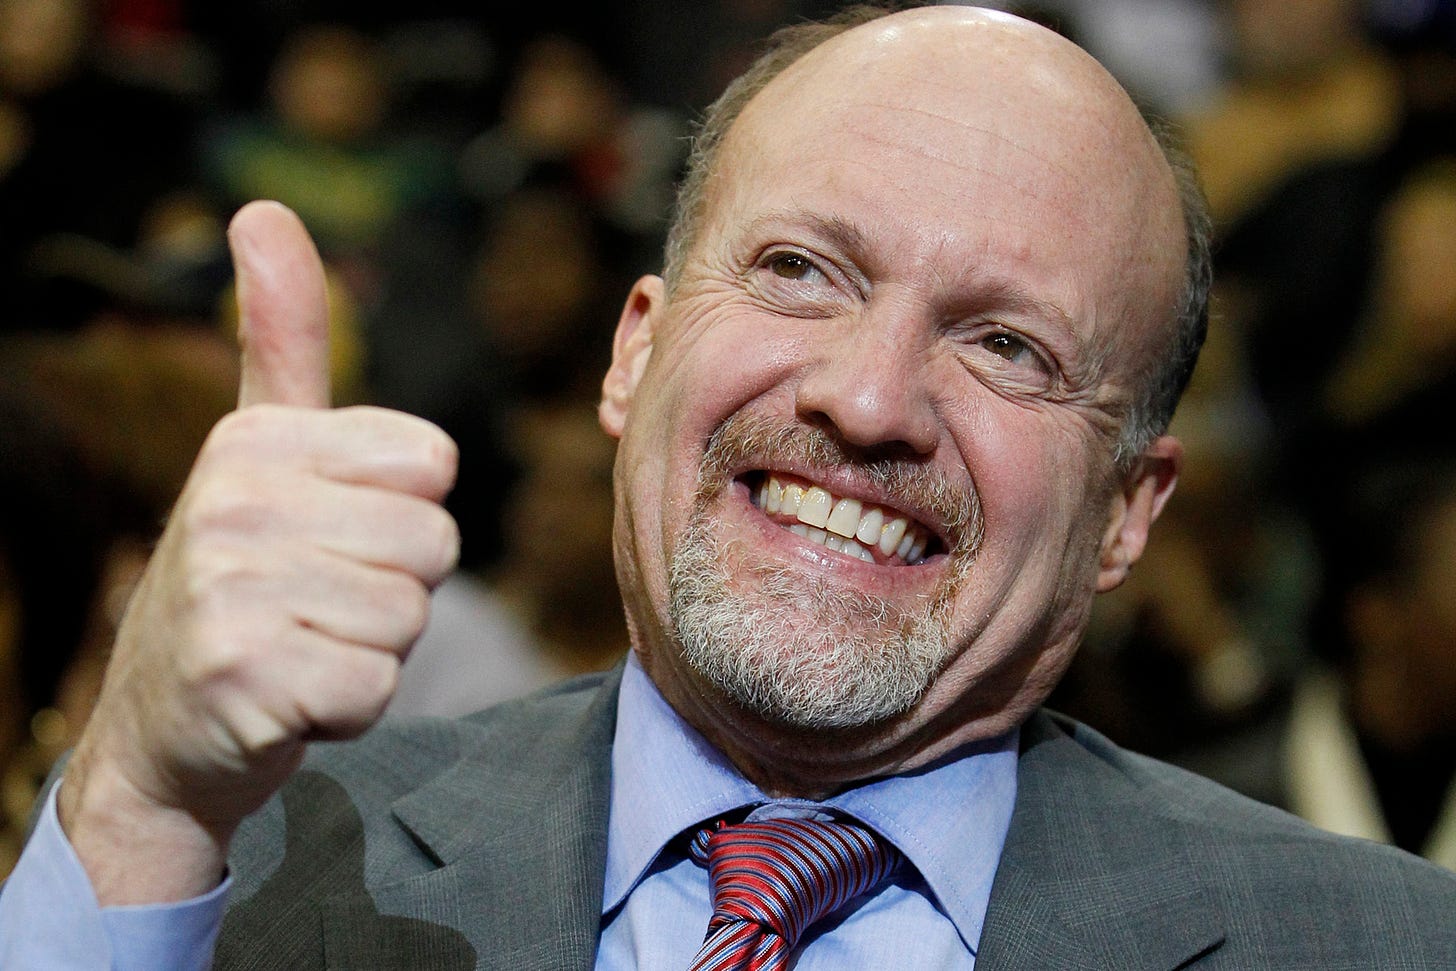 CNBC's Jim Cramer buses tables at his Brooklyn restaurant | Page Six